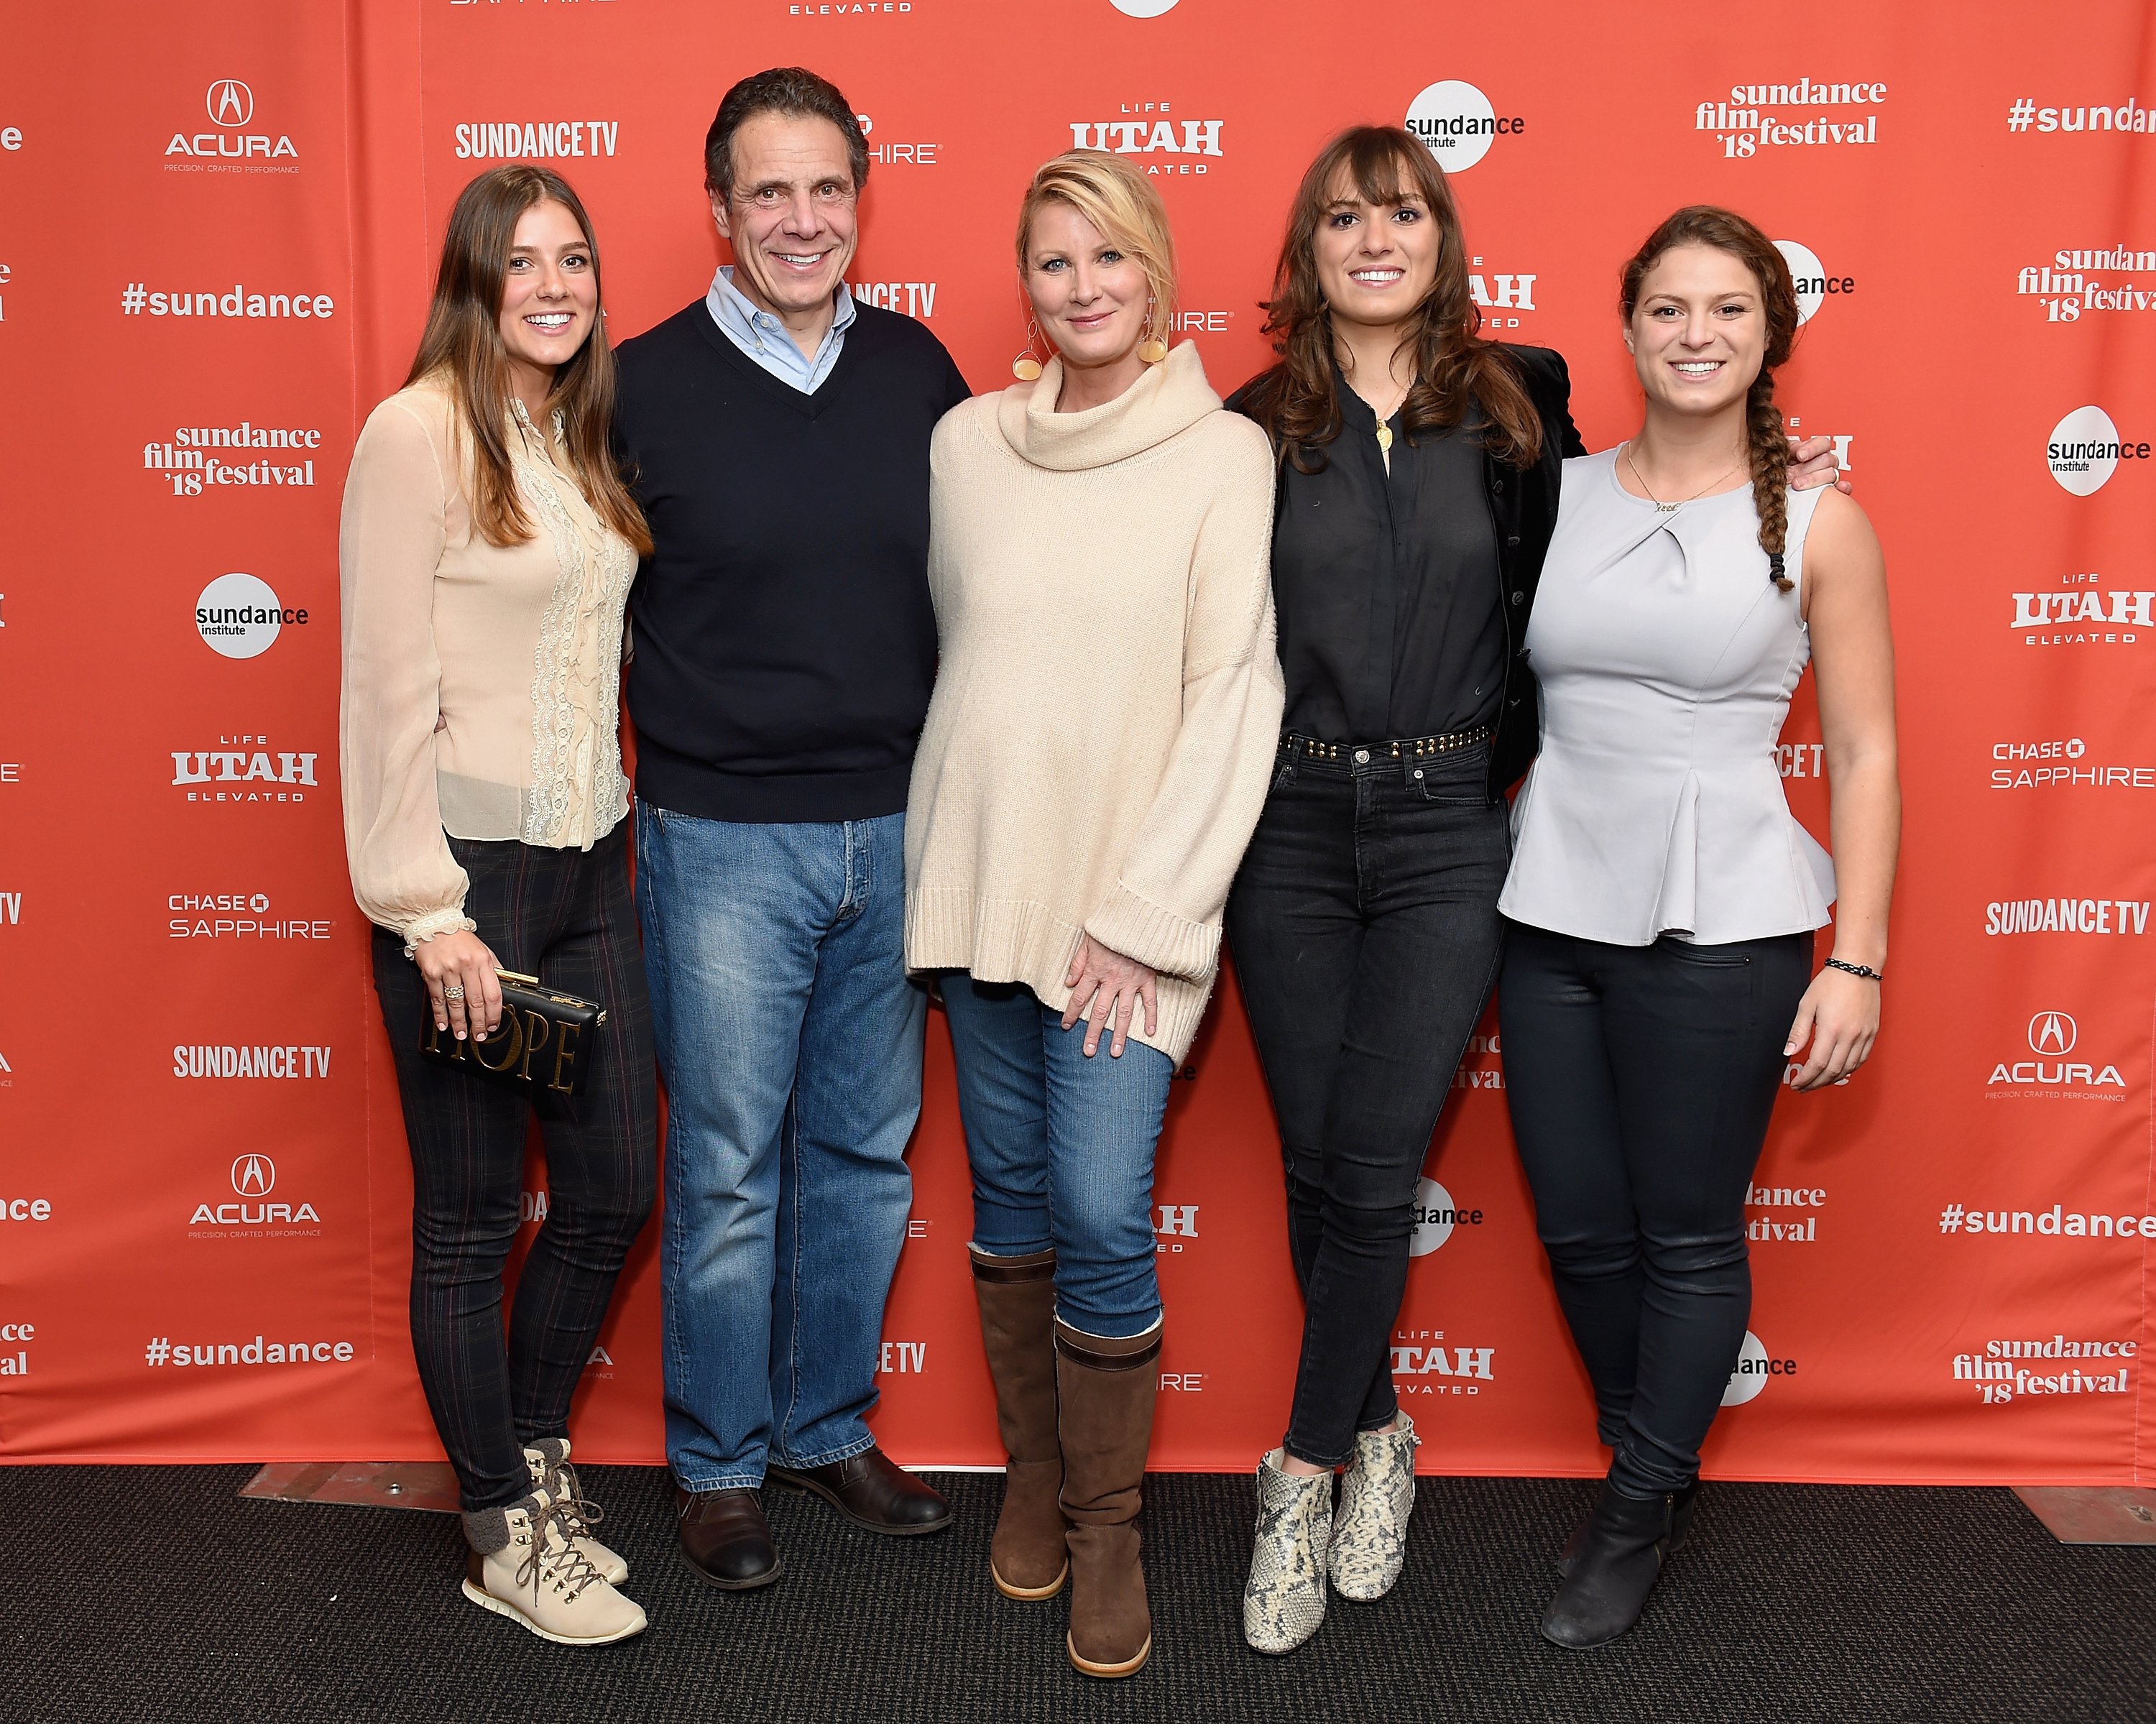 Andrew Cuomo pictured with his ex, Sandra Lee, and his daughters, Michaela Kennedy Cuomo, Mariah Kennedy Cuomo, Cara Kennedy Cuomo at the Sundance Film Festival 2018, Utah. | Photo: Getty Images